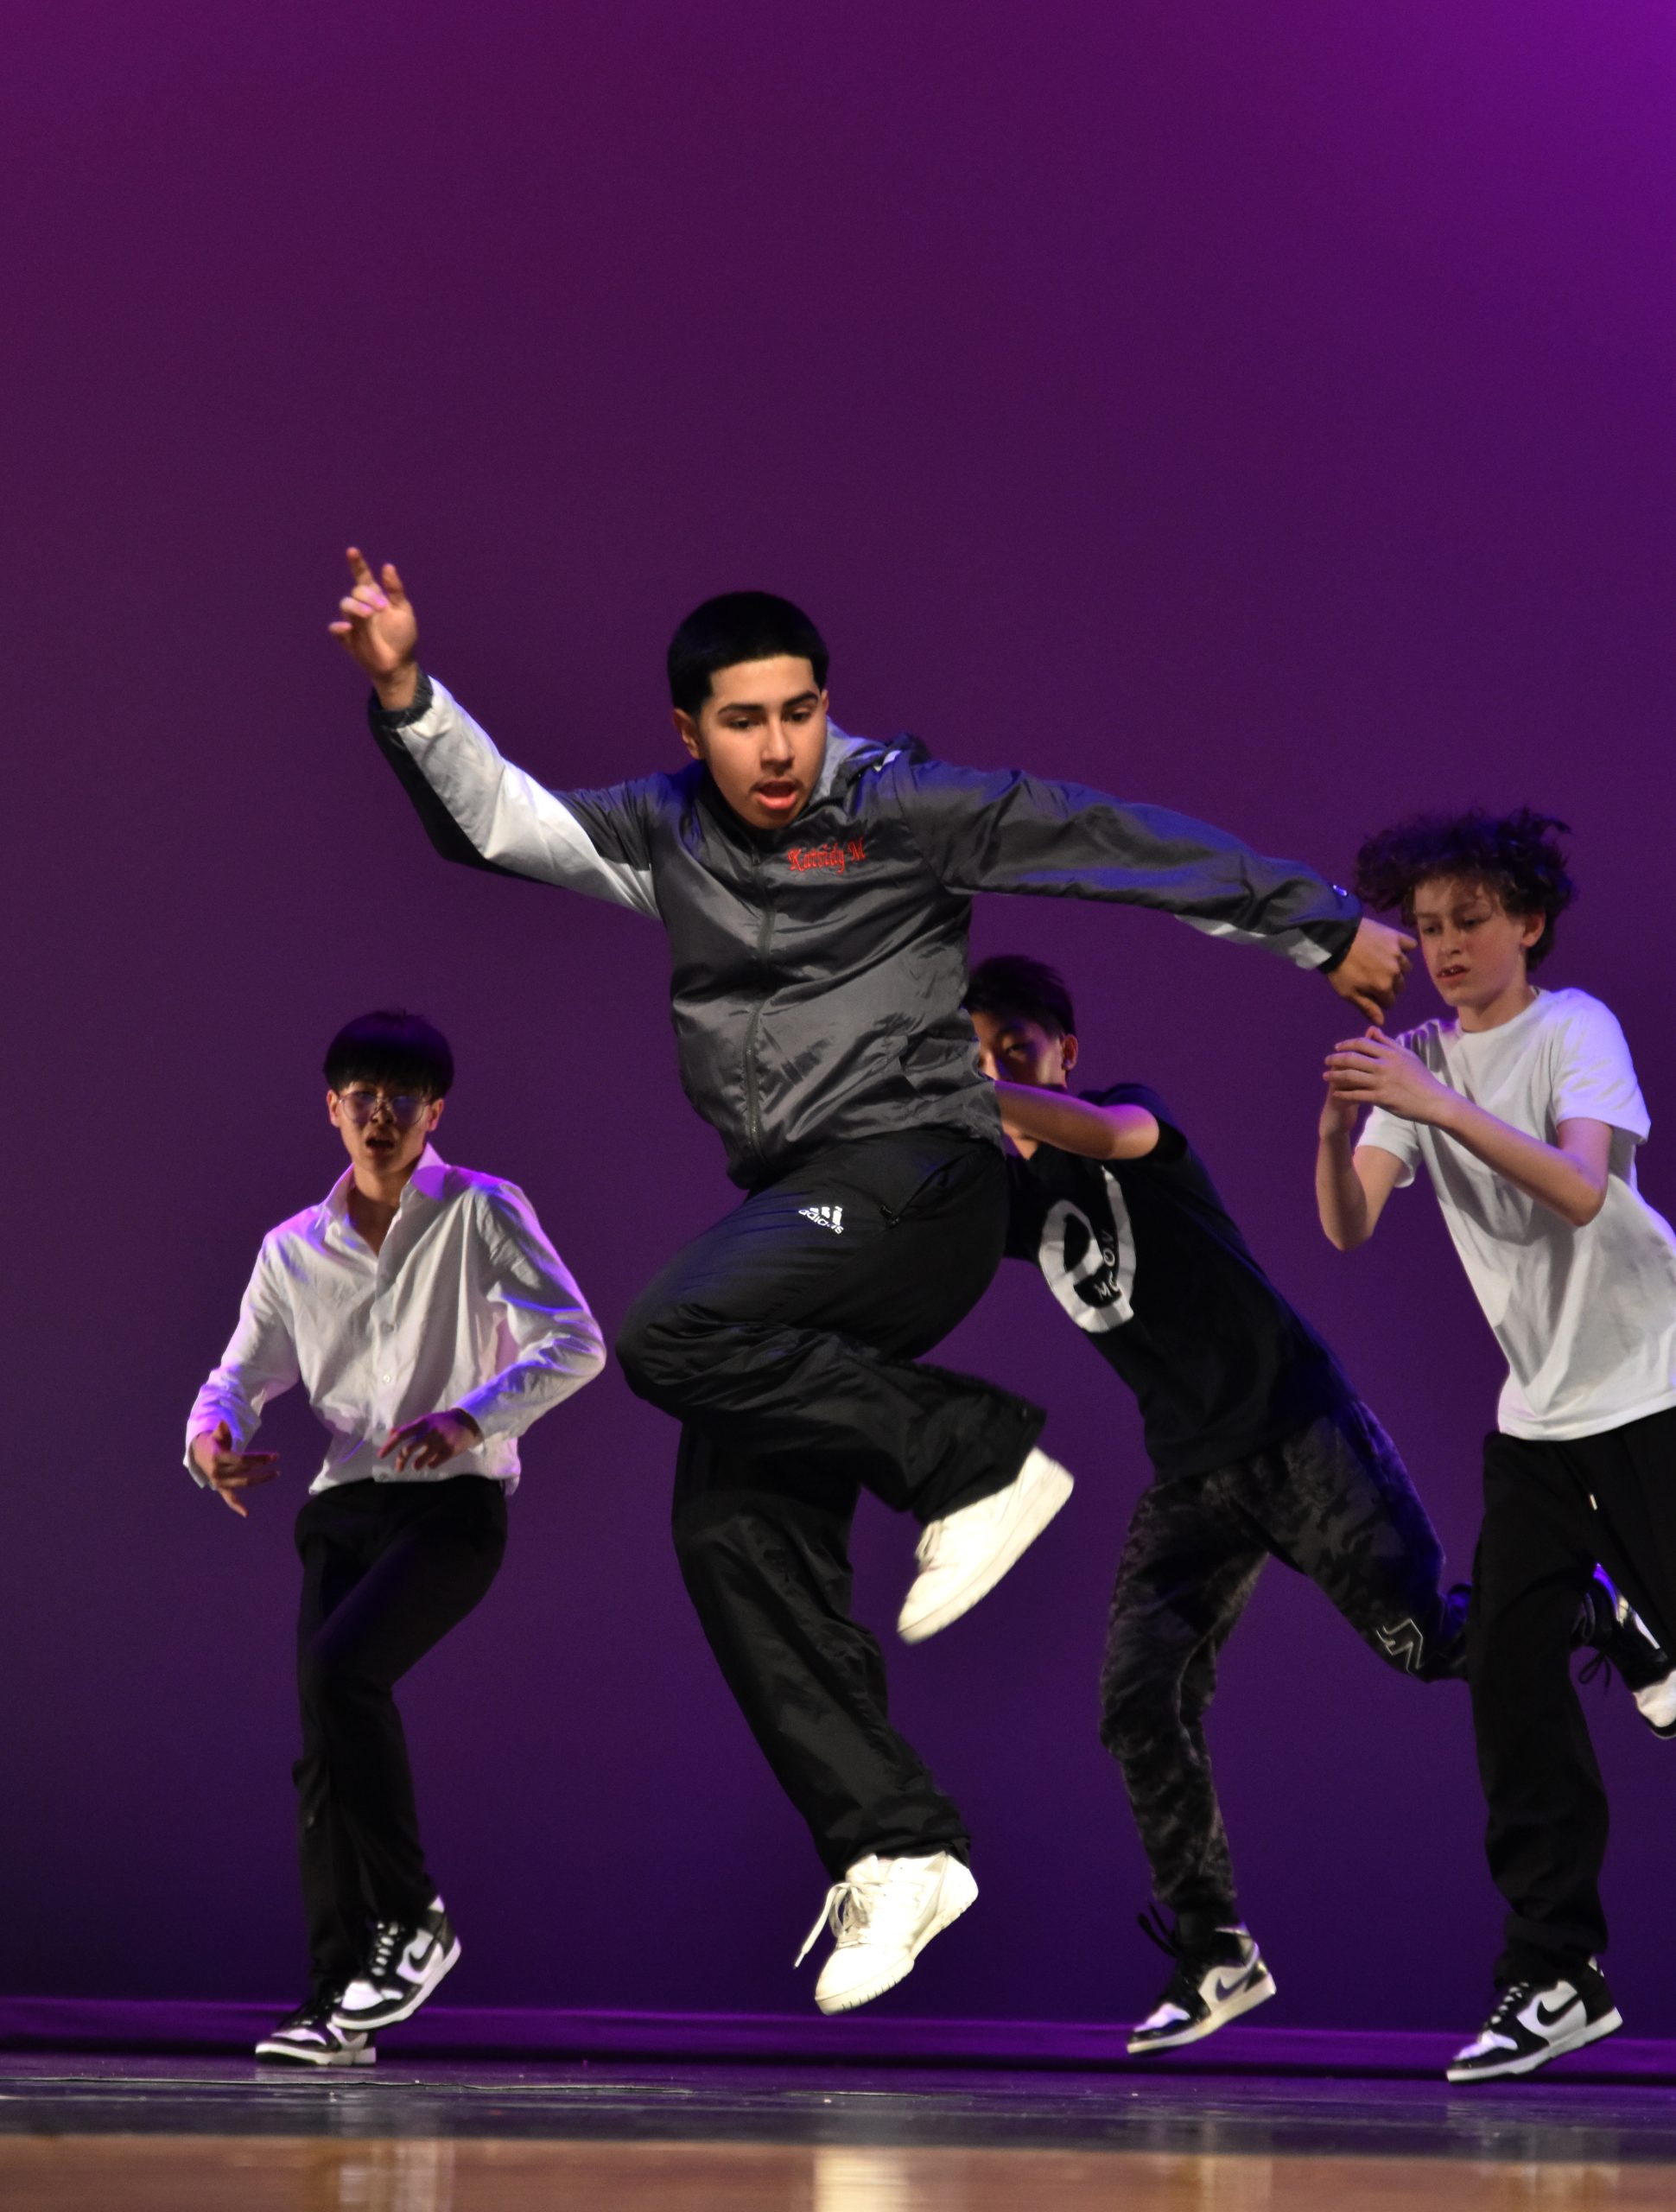 Choreographer and senior Ryan Davalos (center) performs “Dance the Night Away” at the end of the show. He and several other choreographers created this finale of the eMotion Dance Companys fall show.